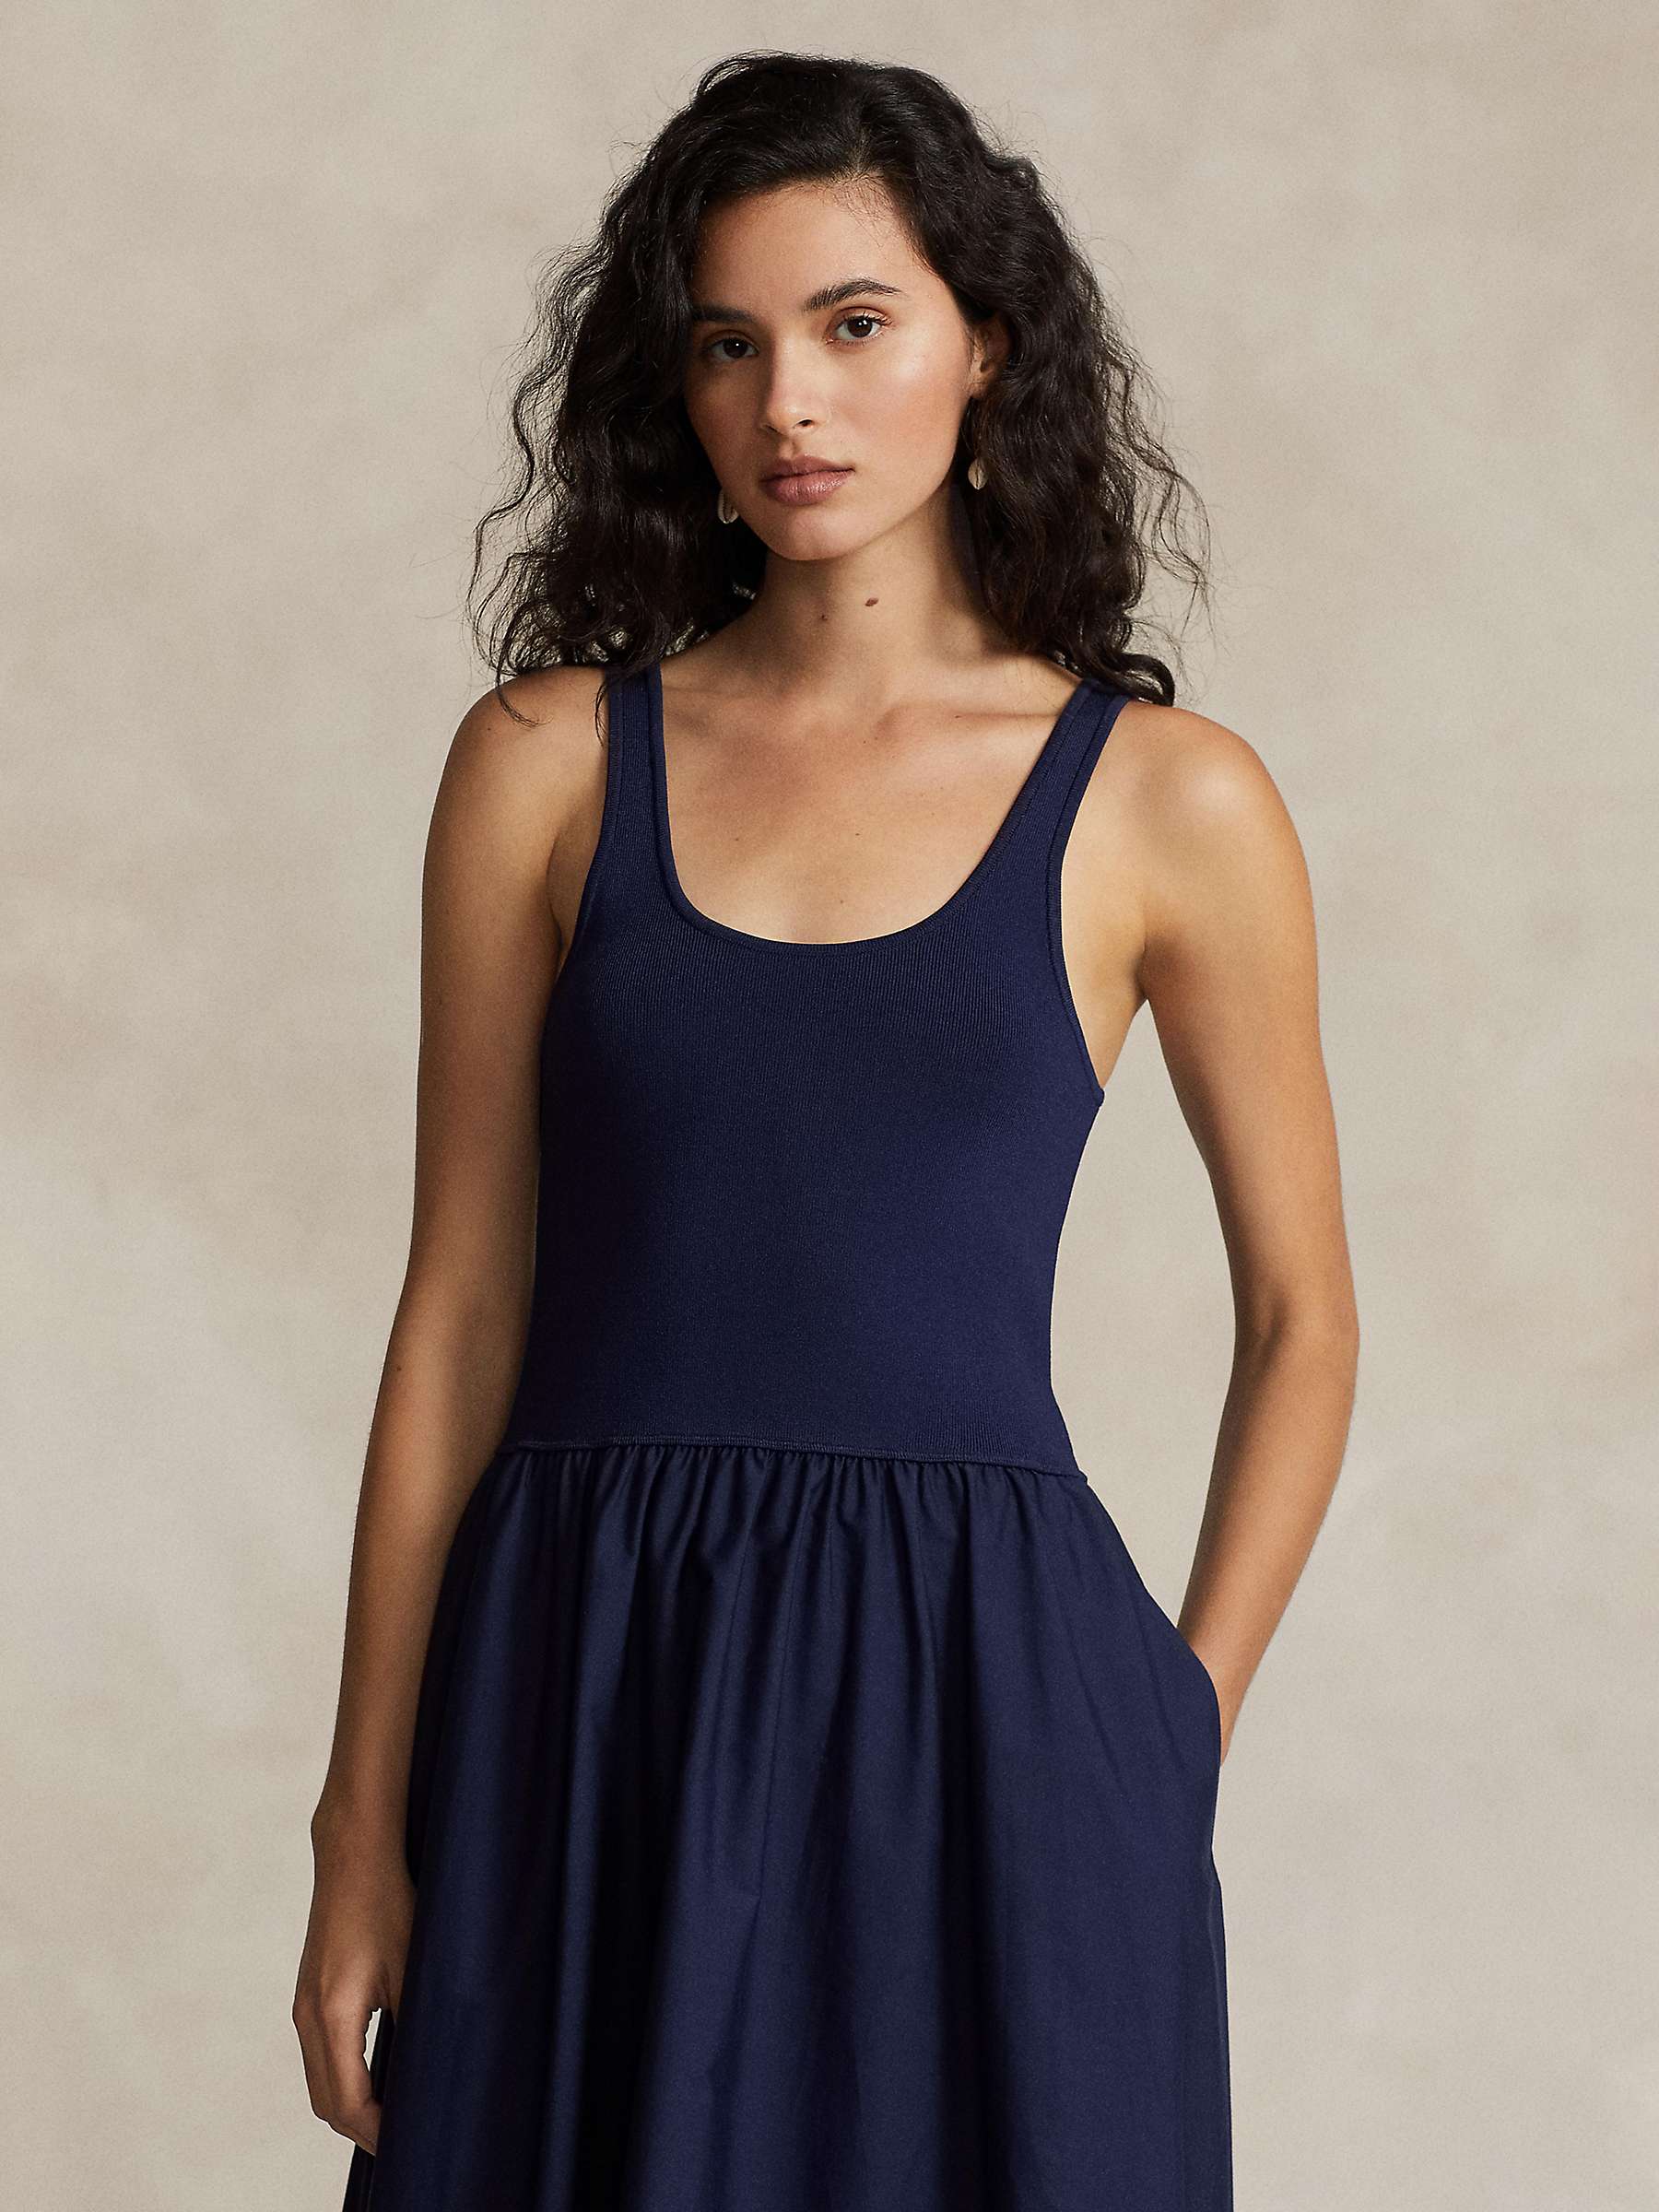 Buy Polo Ralph Lauren Zaha Fit and Flare Midi Dress, Navy Online at johnlewis.com